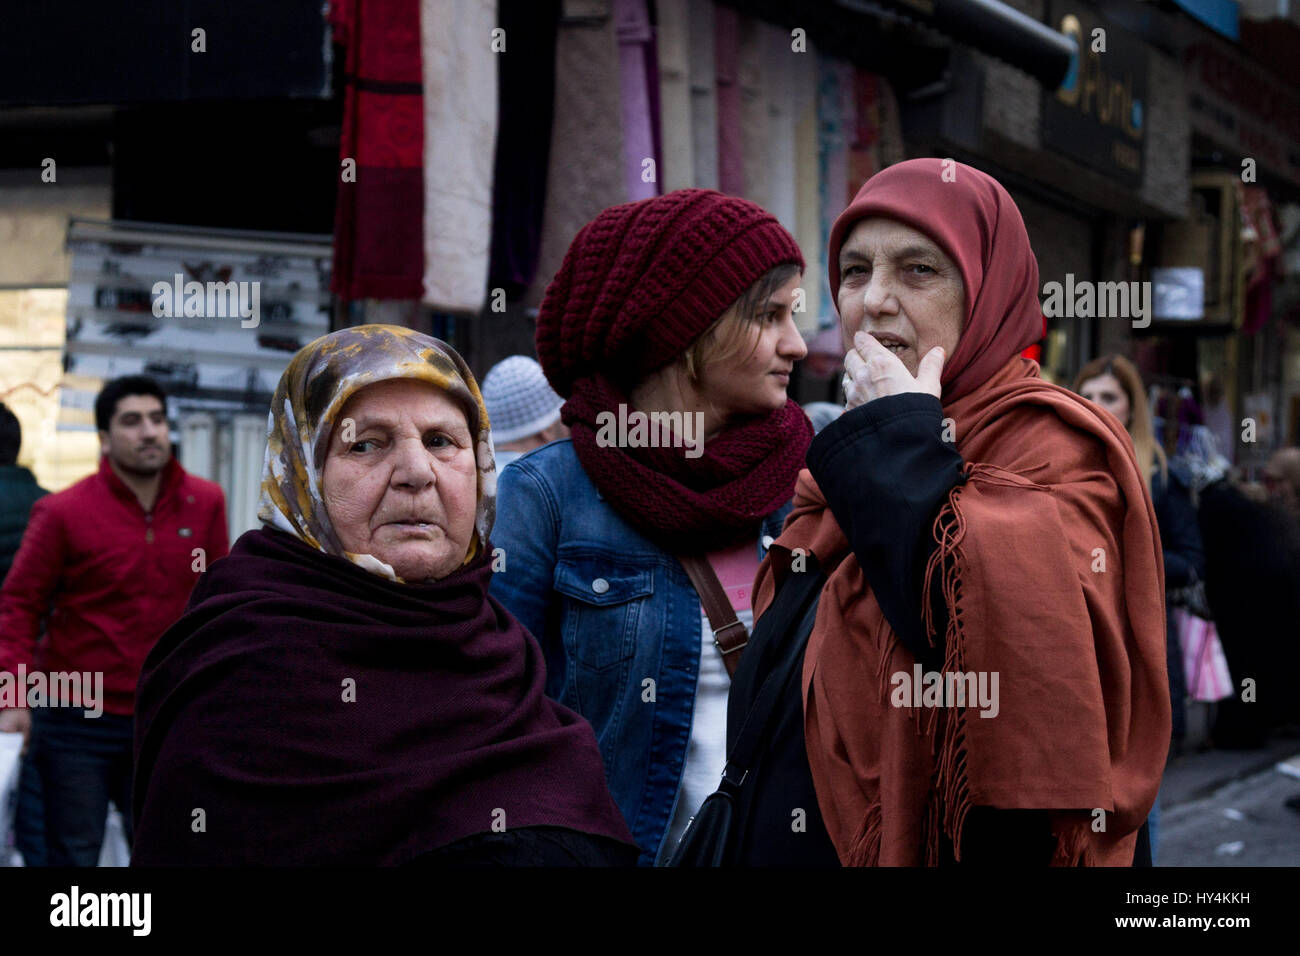 ISTANBUL, TURKEY - DECEMBER 28, 2015: Women wearing islamic headscarf of various ages in the streets of Istanbul  Picture of three different women, of Stock Photo